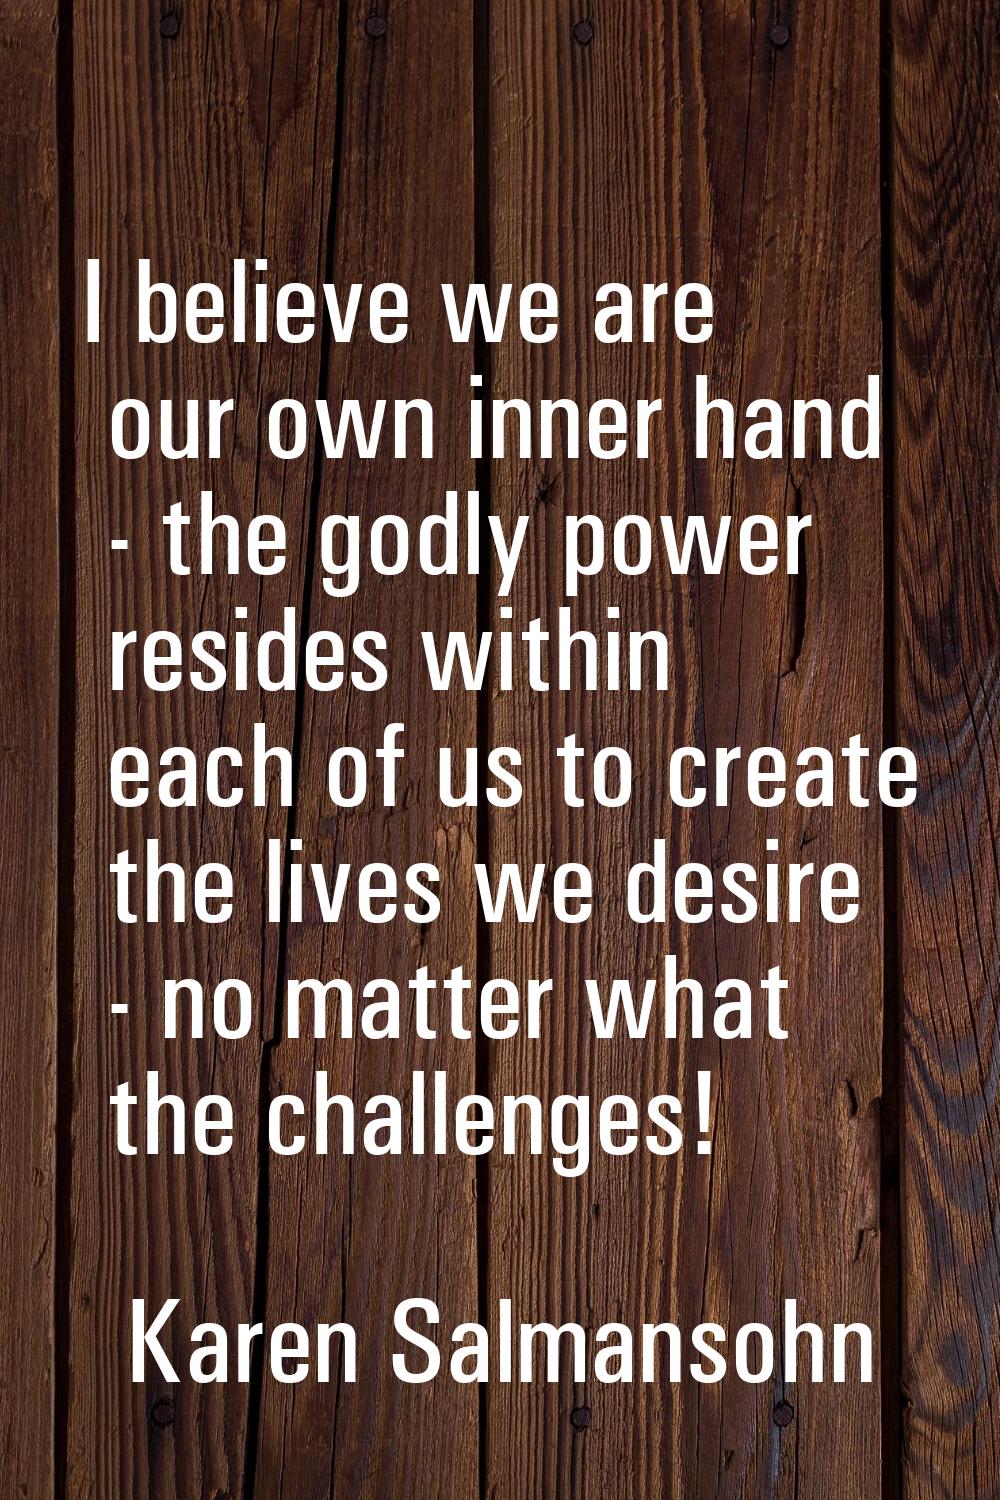 I believe we are our own inner hand - the godly power resides within each of us to create the lives